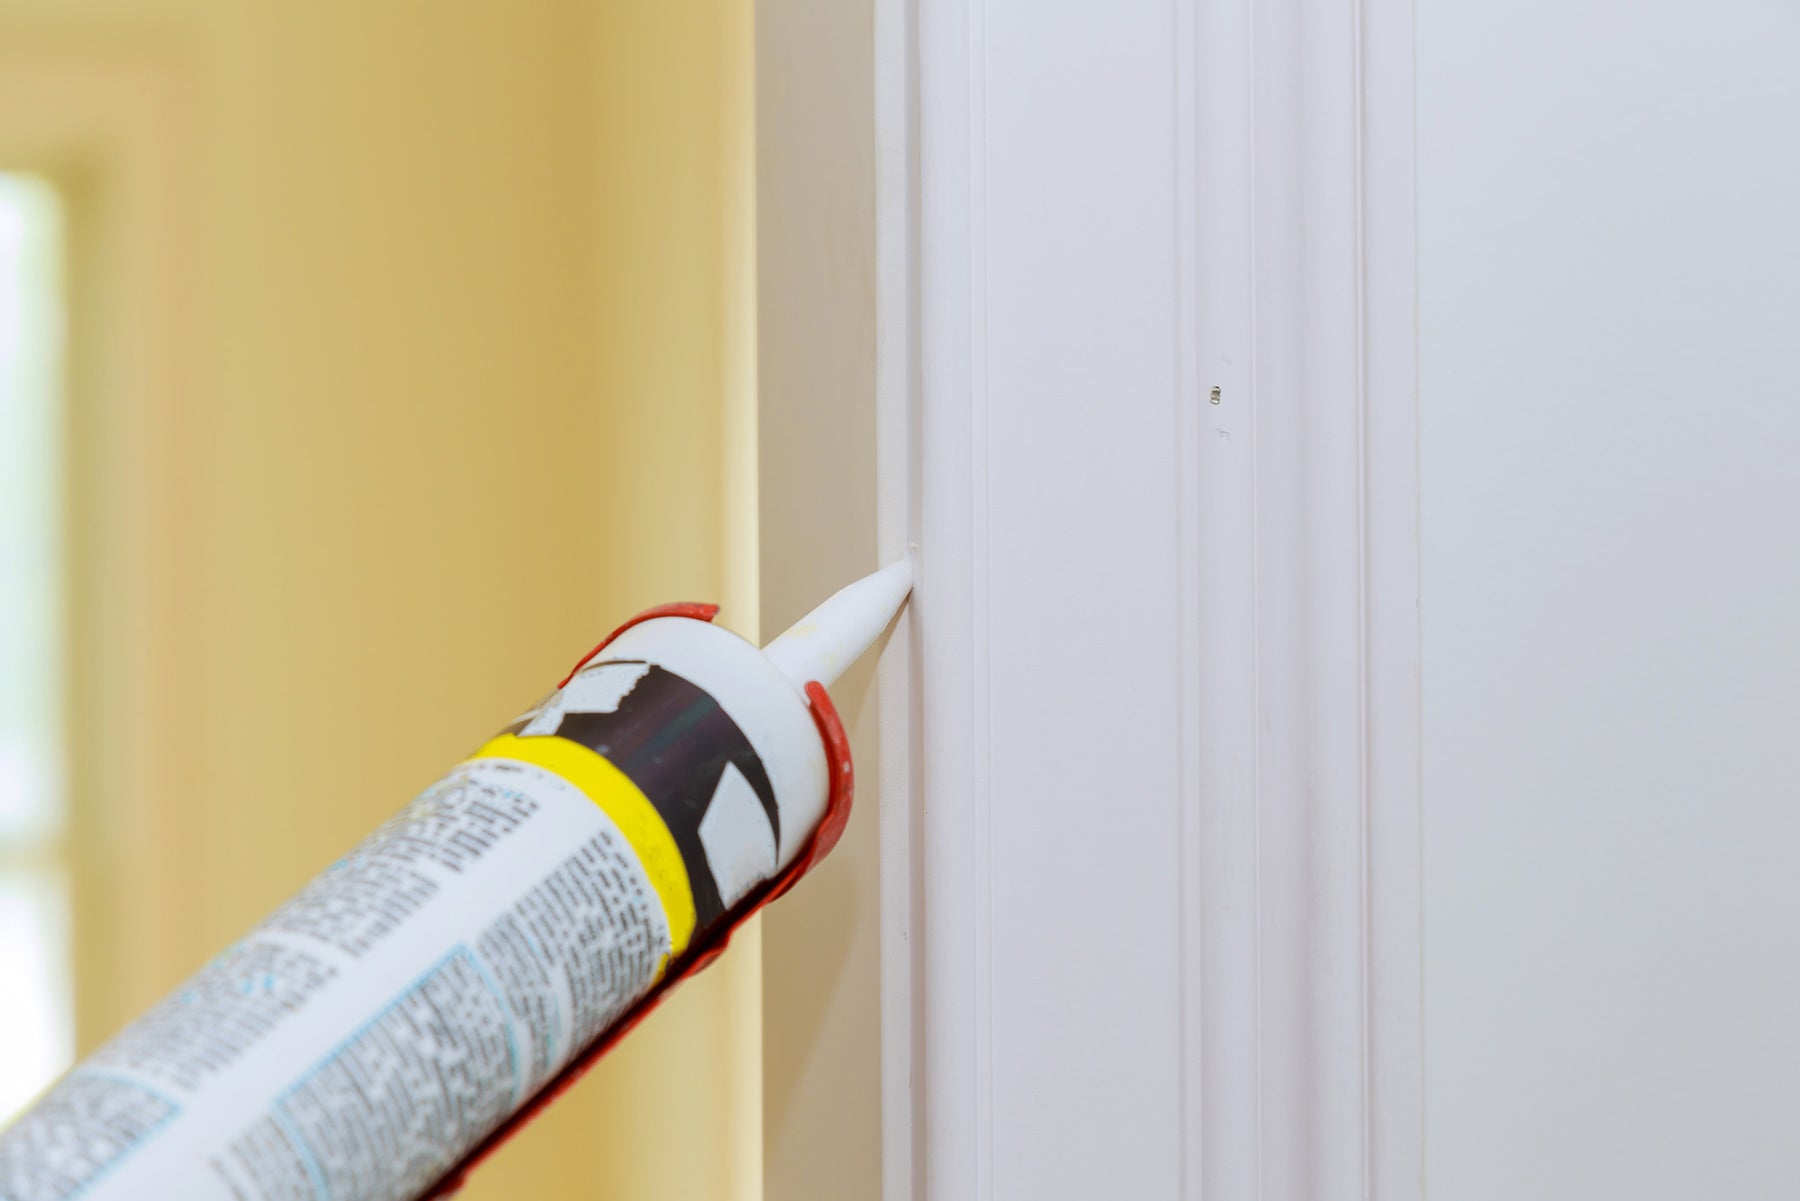 Exterior Caulking: Before or After Painting?